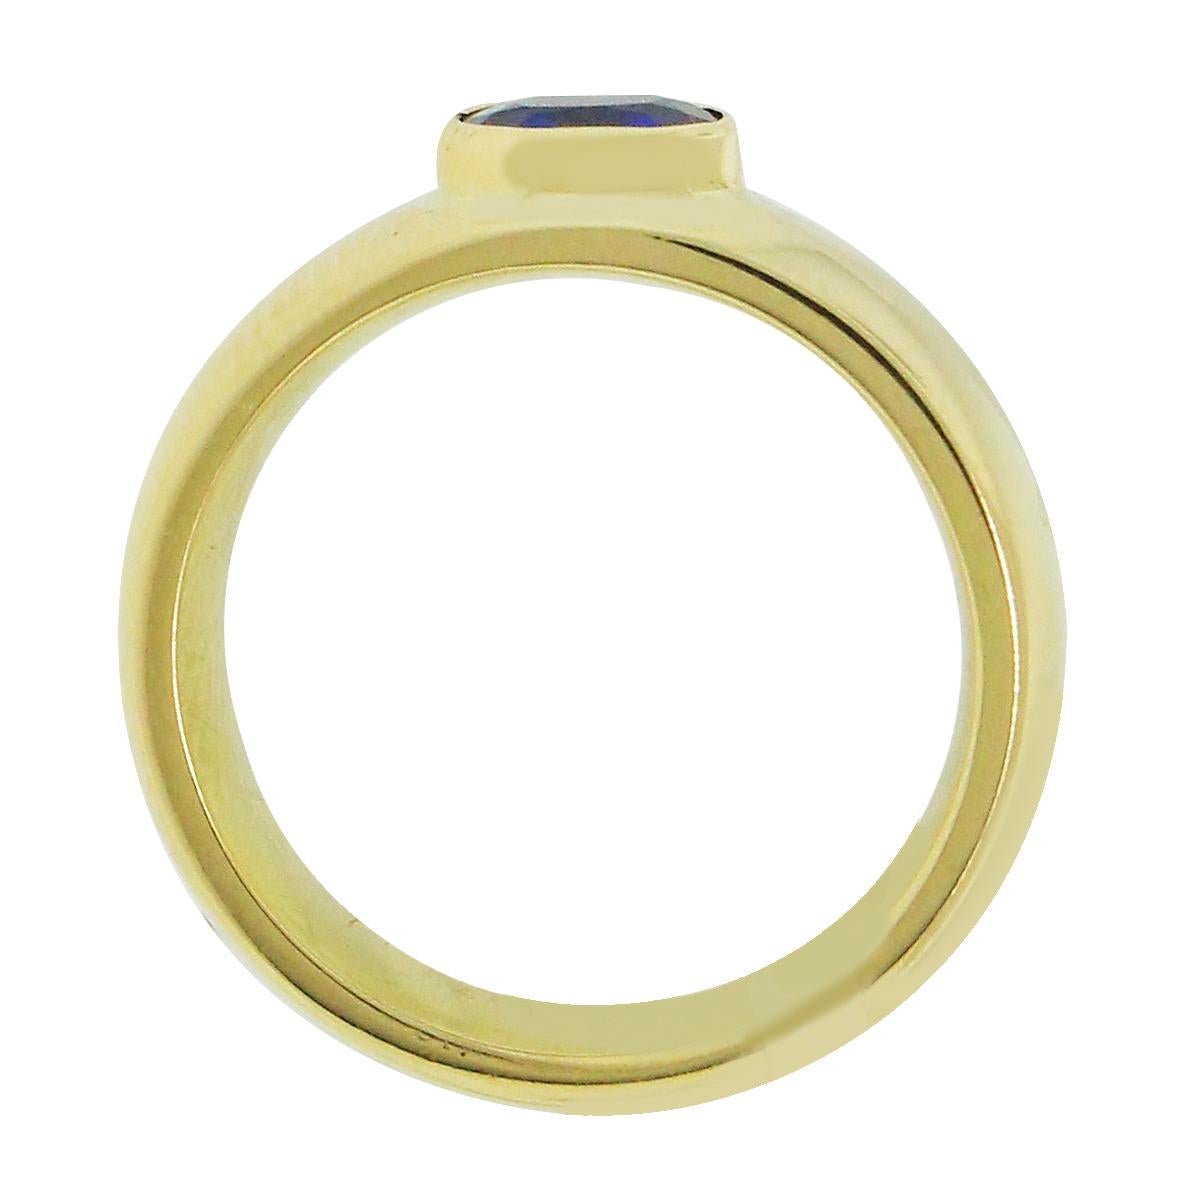 Material: 18k Yellow Gold
Gemstone Details: Approximately 0.35ctw round blue sapphire gemstones.
Ring Size: 4.75
Total Weight: 8.8g (5.7dwt)
Measurements: 0.78